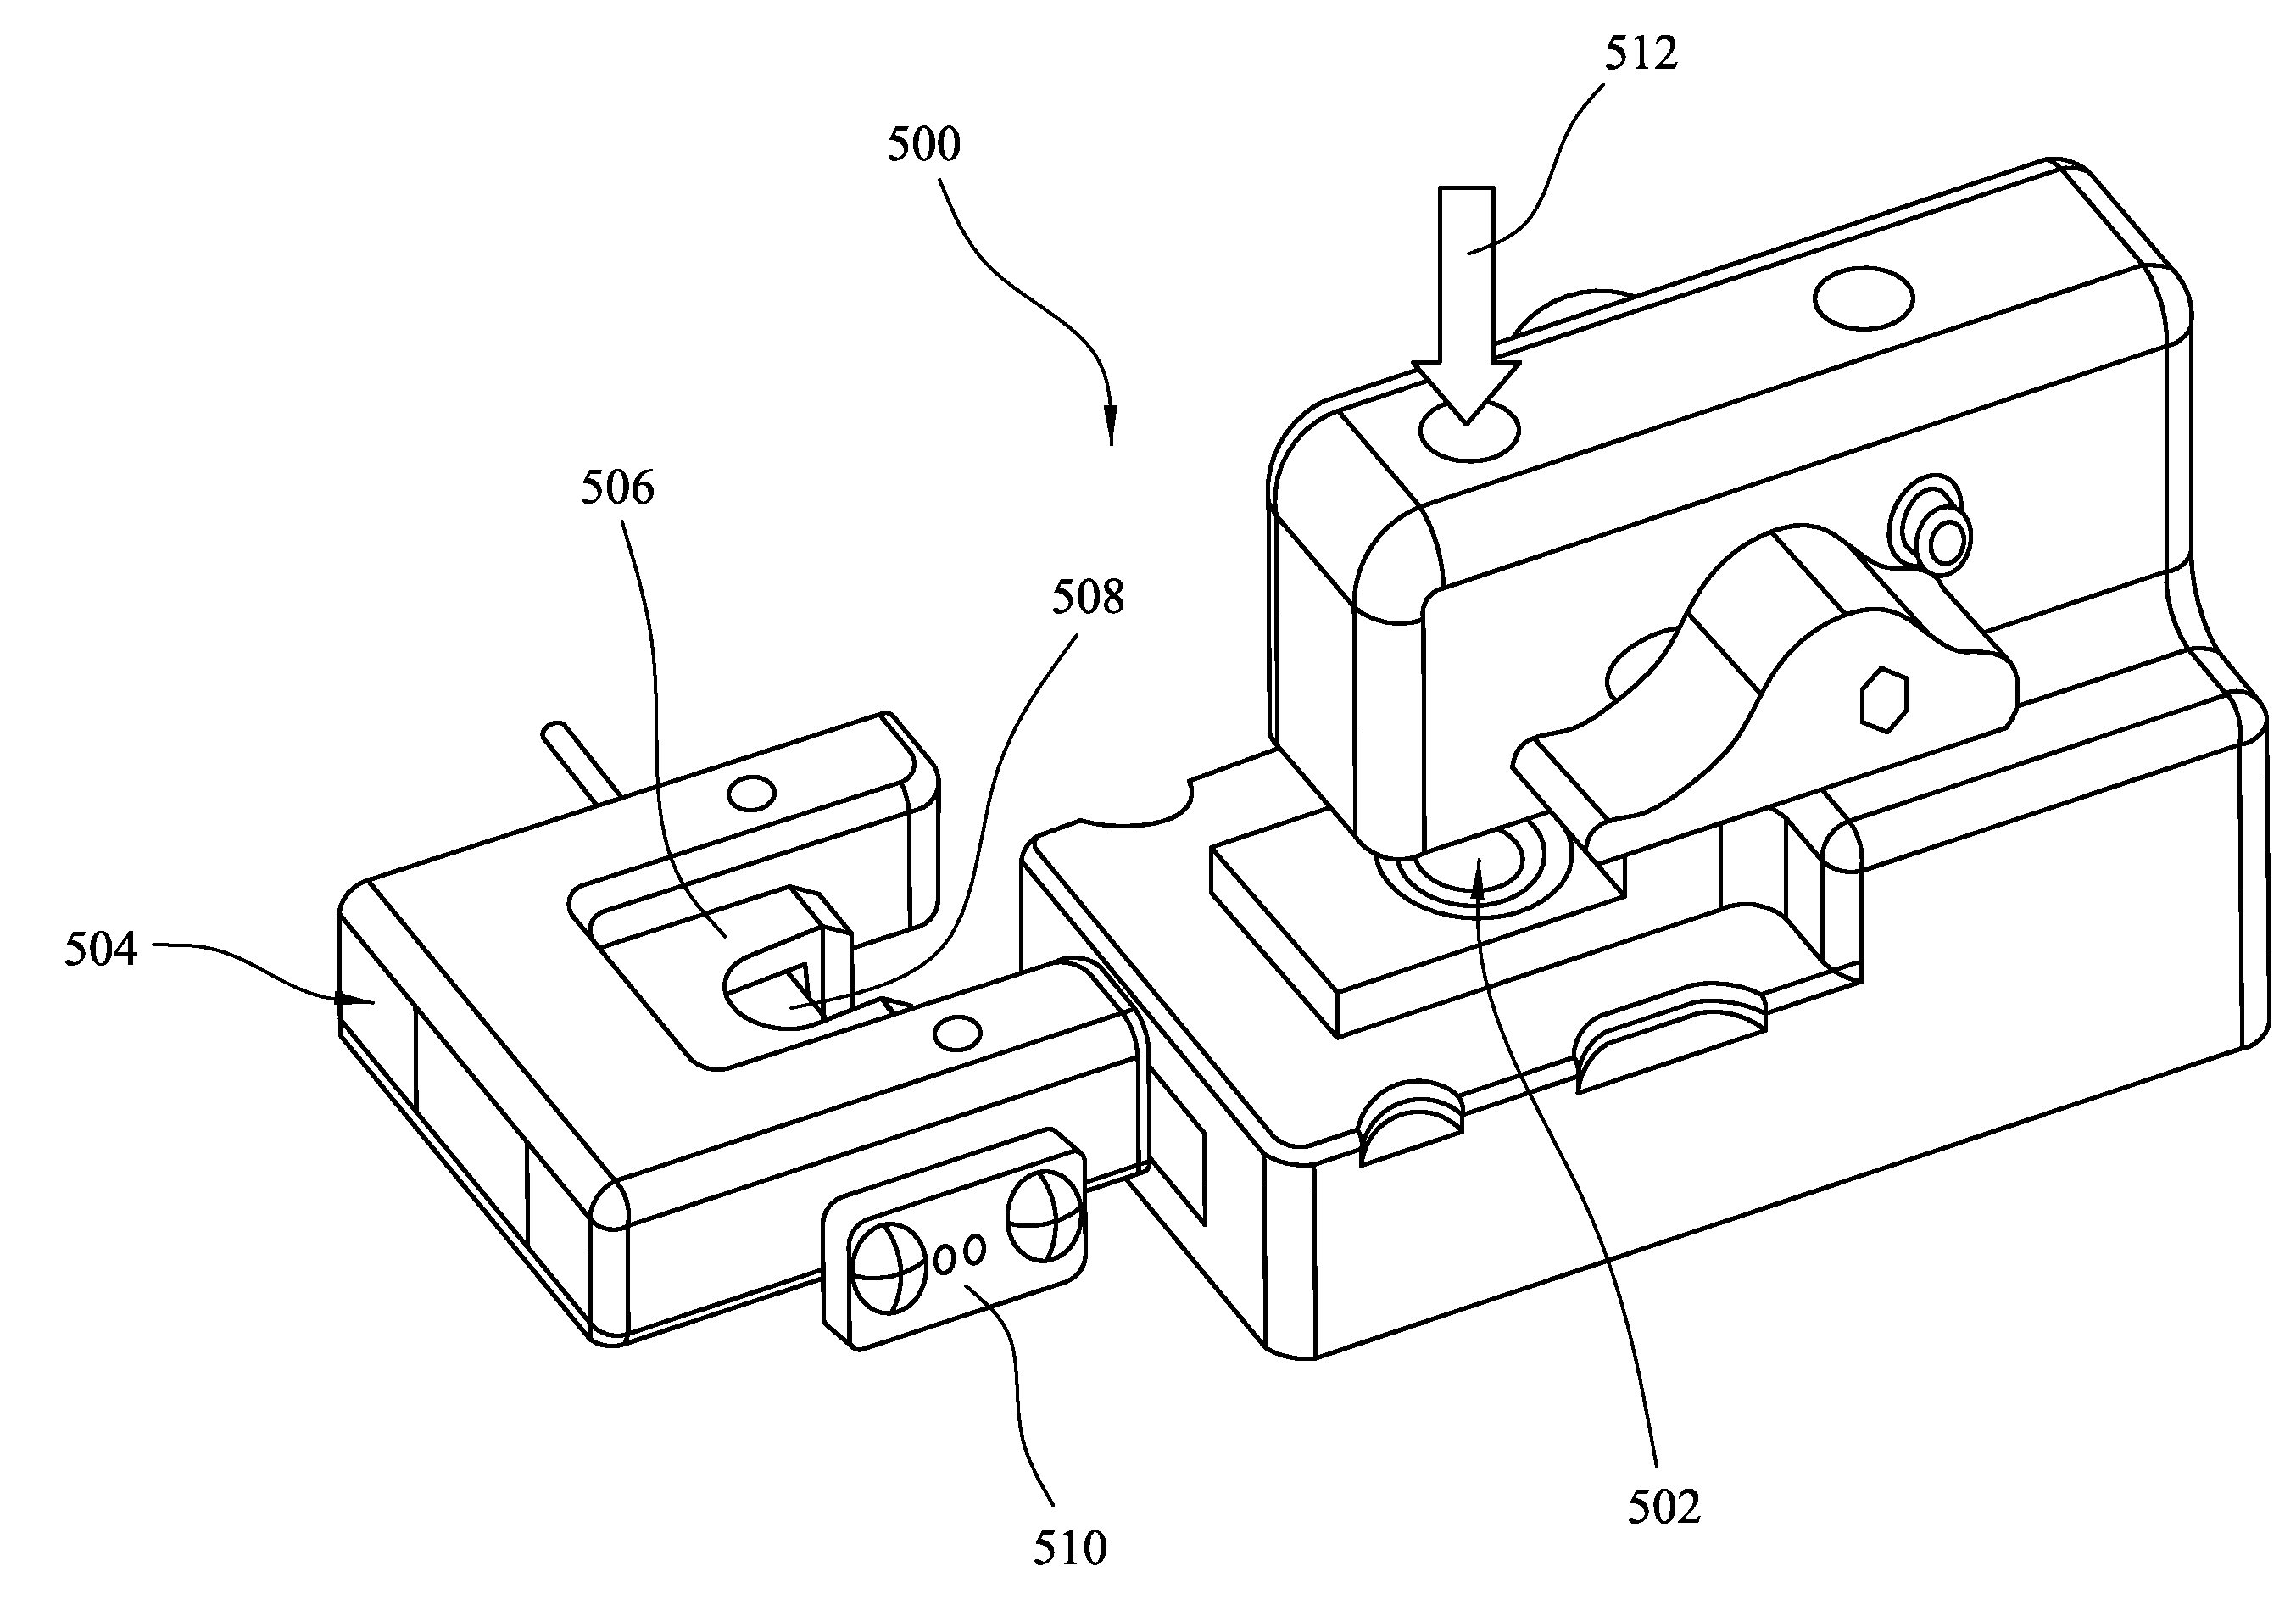 Optical assembly and method